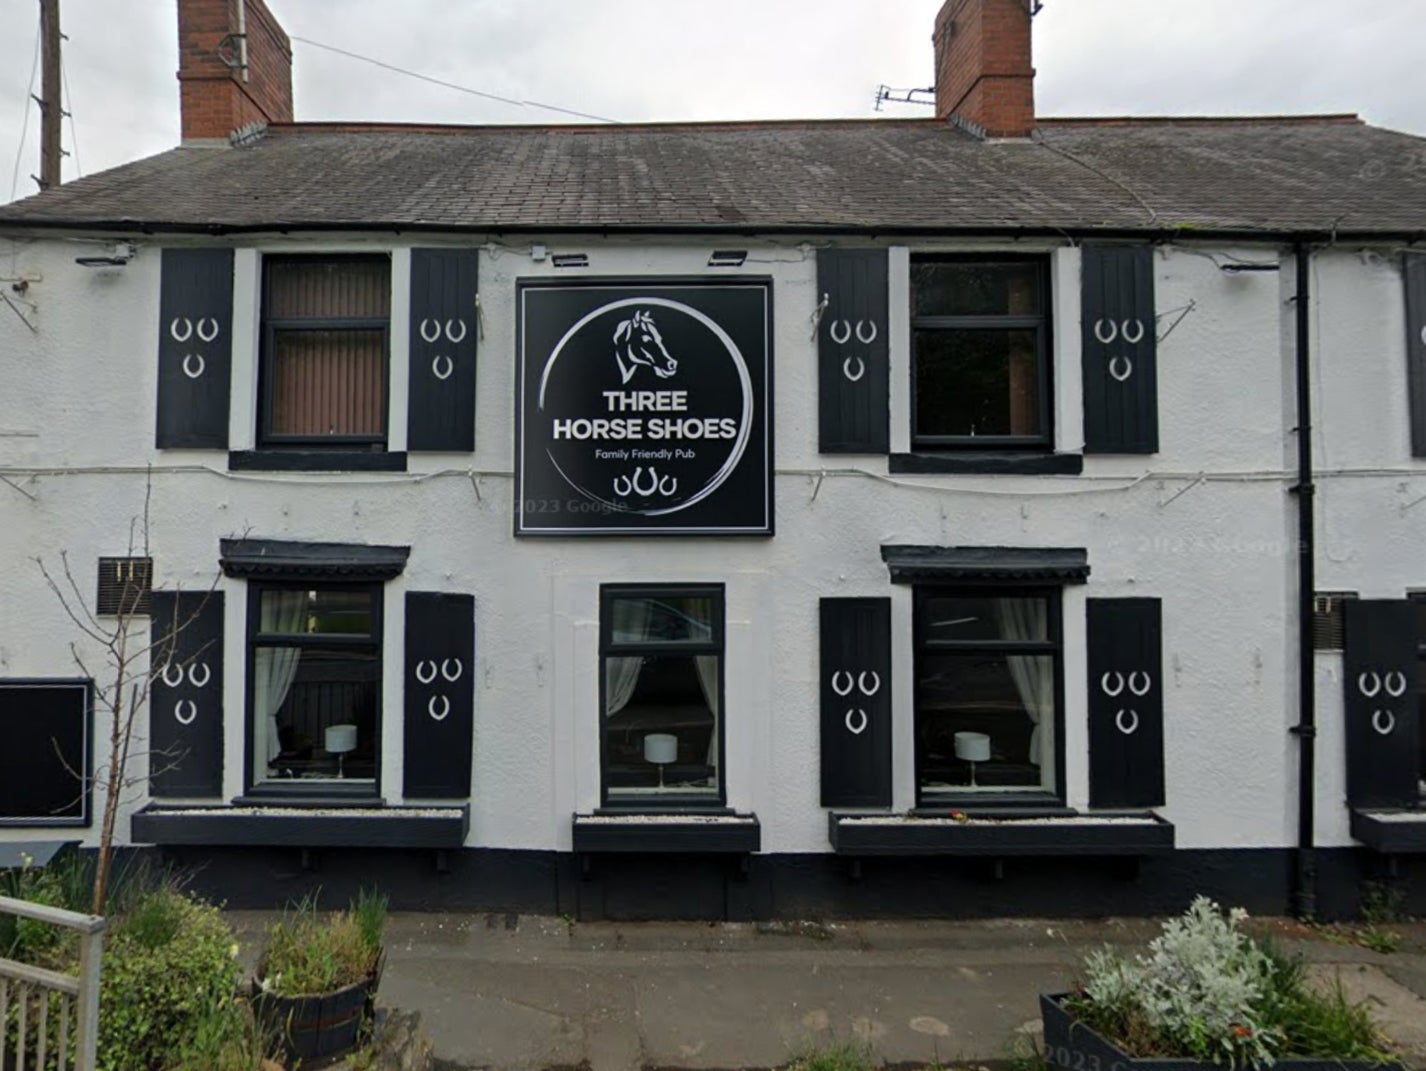 The baby girl was found at the Three Horse Shoes pub in Oulton